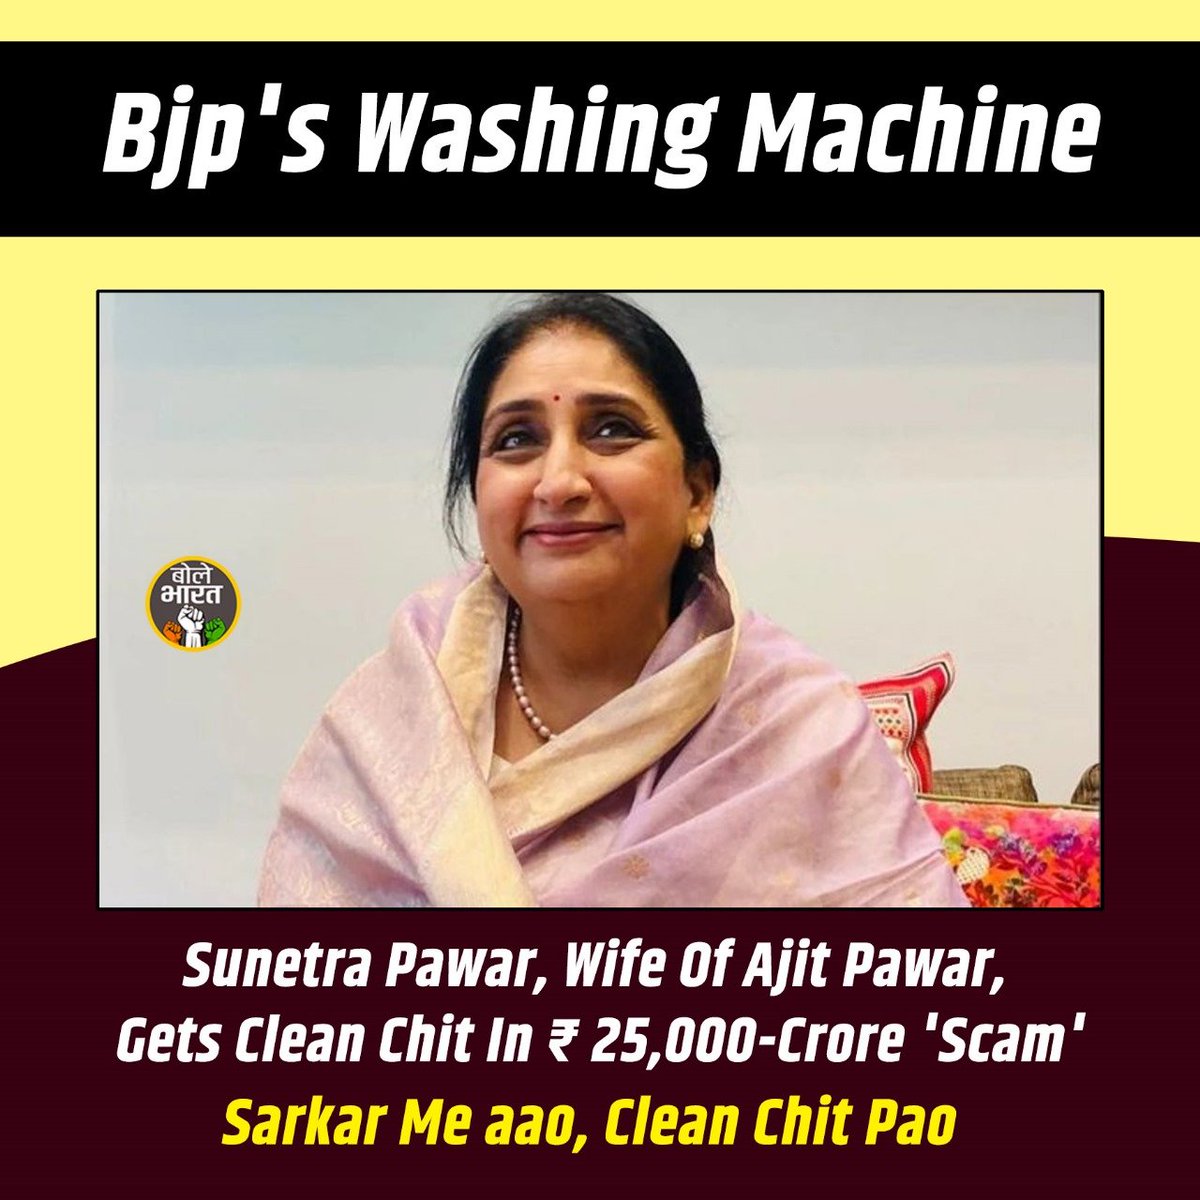 BJP washing machine doing very well. It washing all the corruption charges that was bearing by BJP's candidates. 

#CorruptBJP #NarendraModi #SunetraPawar #Maharashtra #Banks #Scam #ElectionCommission #Court #ElectoralBond #Loan #Debt #RBI #kotakbank #GodiMedia #SupremeCourt